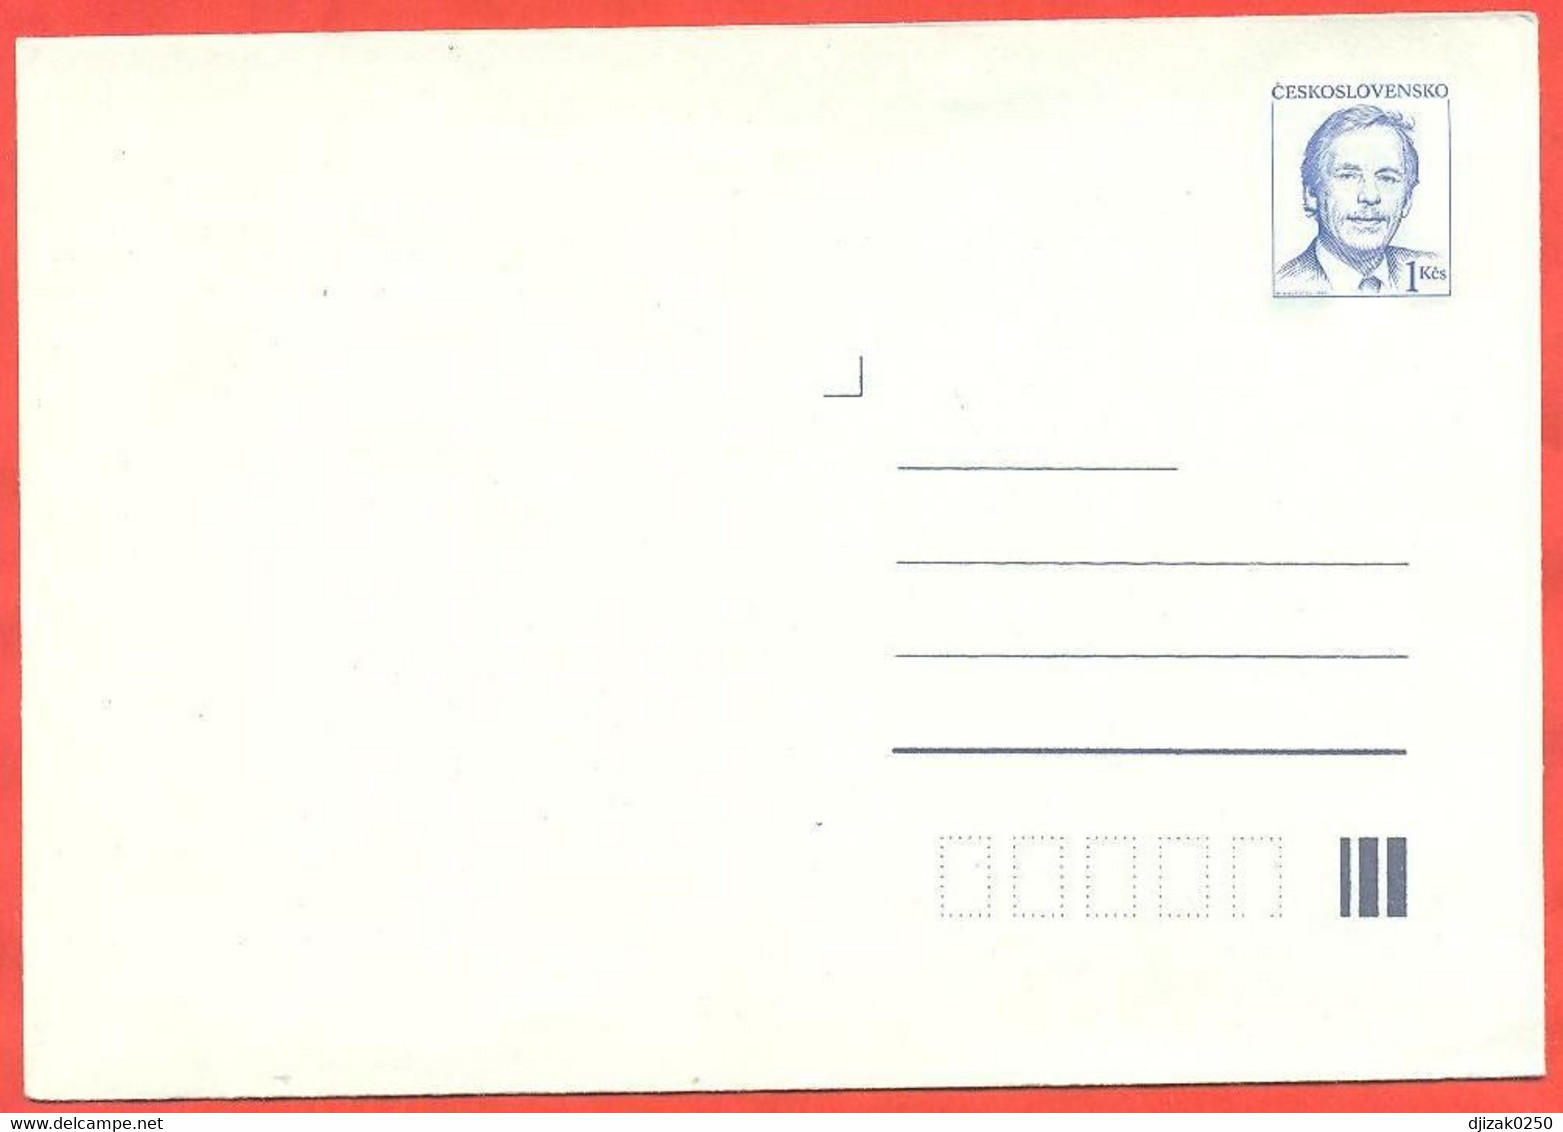 Czechoslovakia 1990. The Envelope With Printed Stamp. Unused. - Briefe